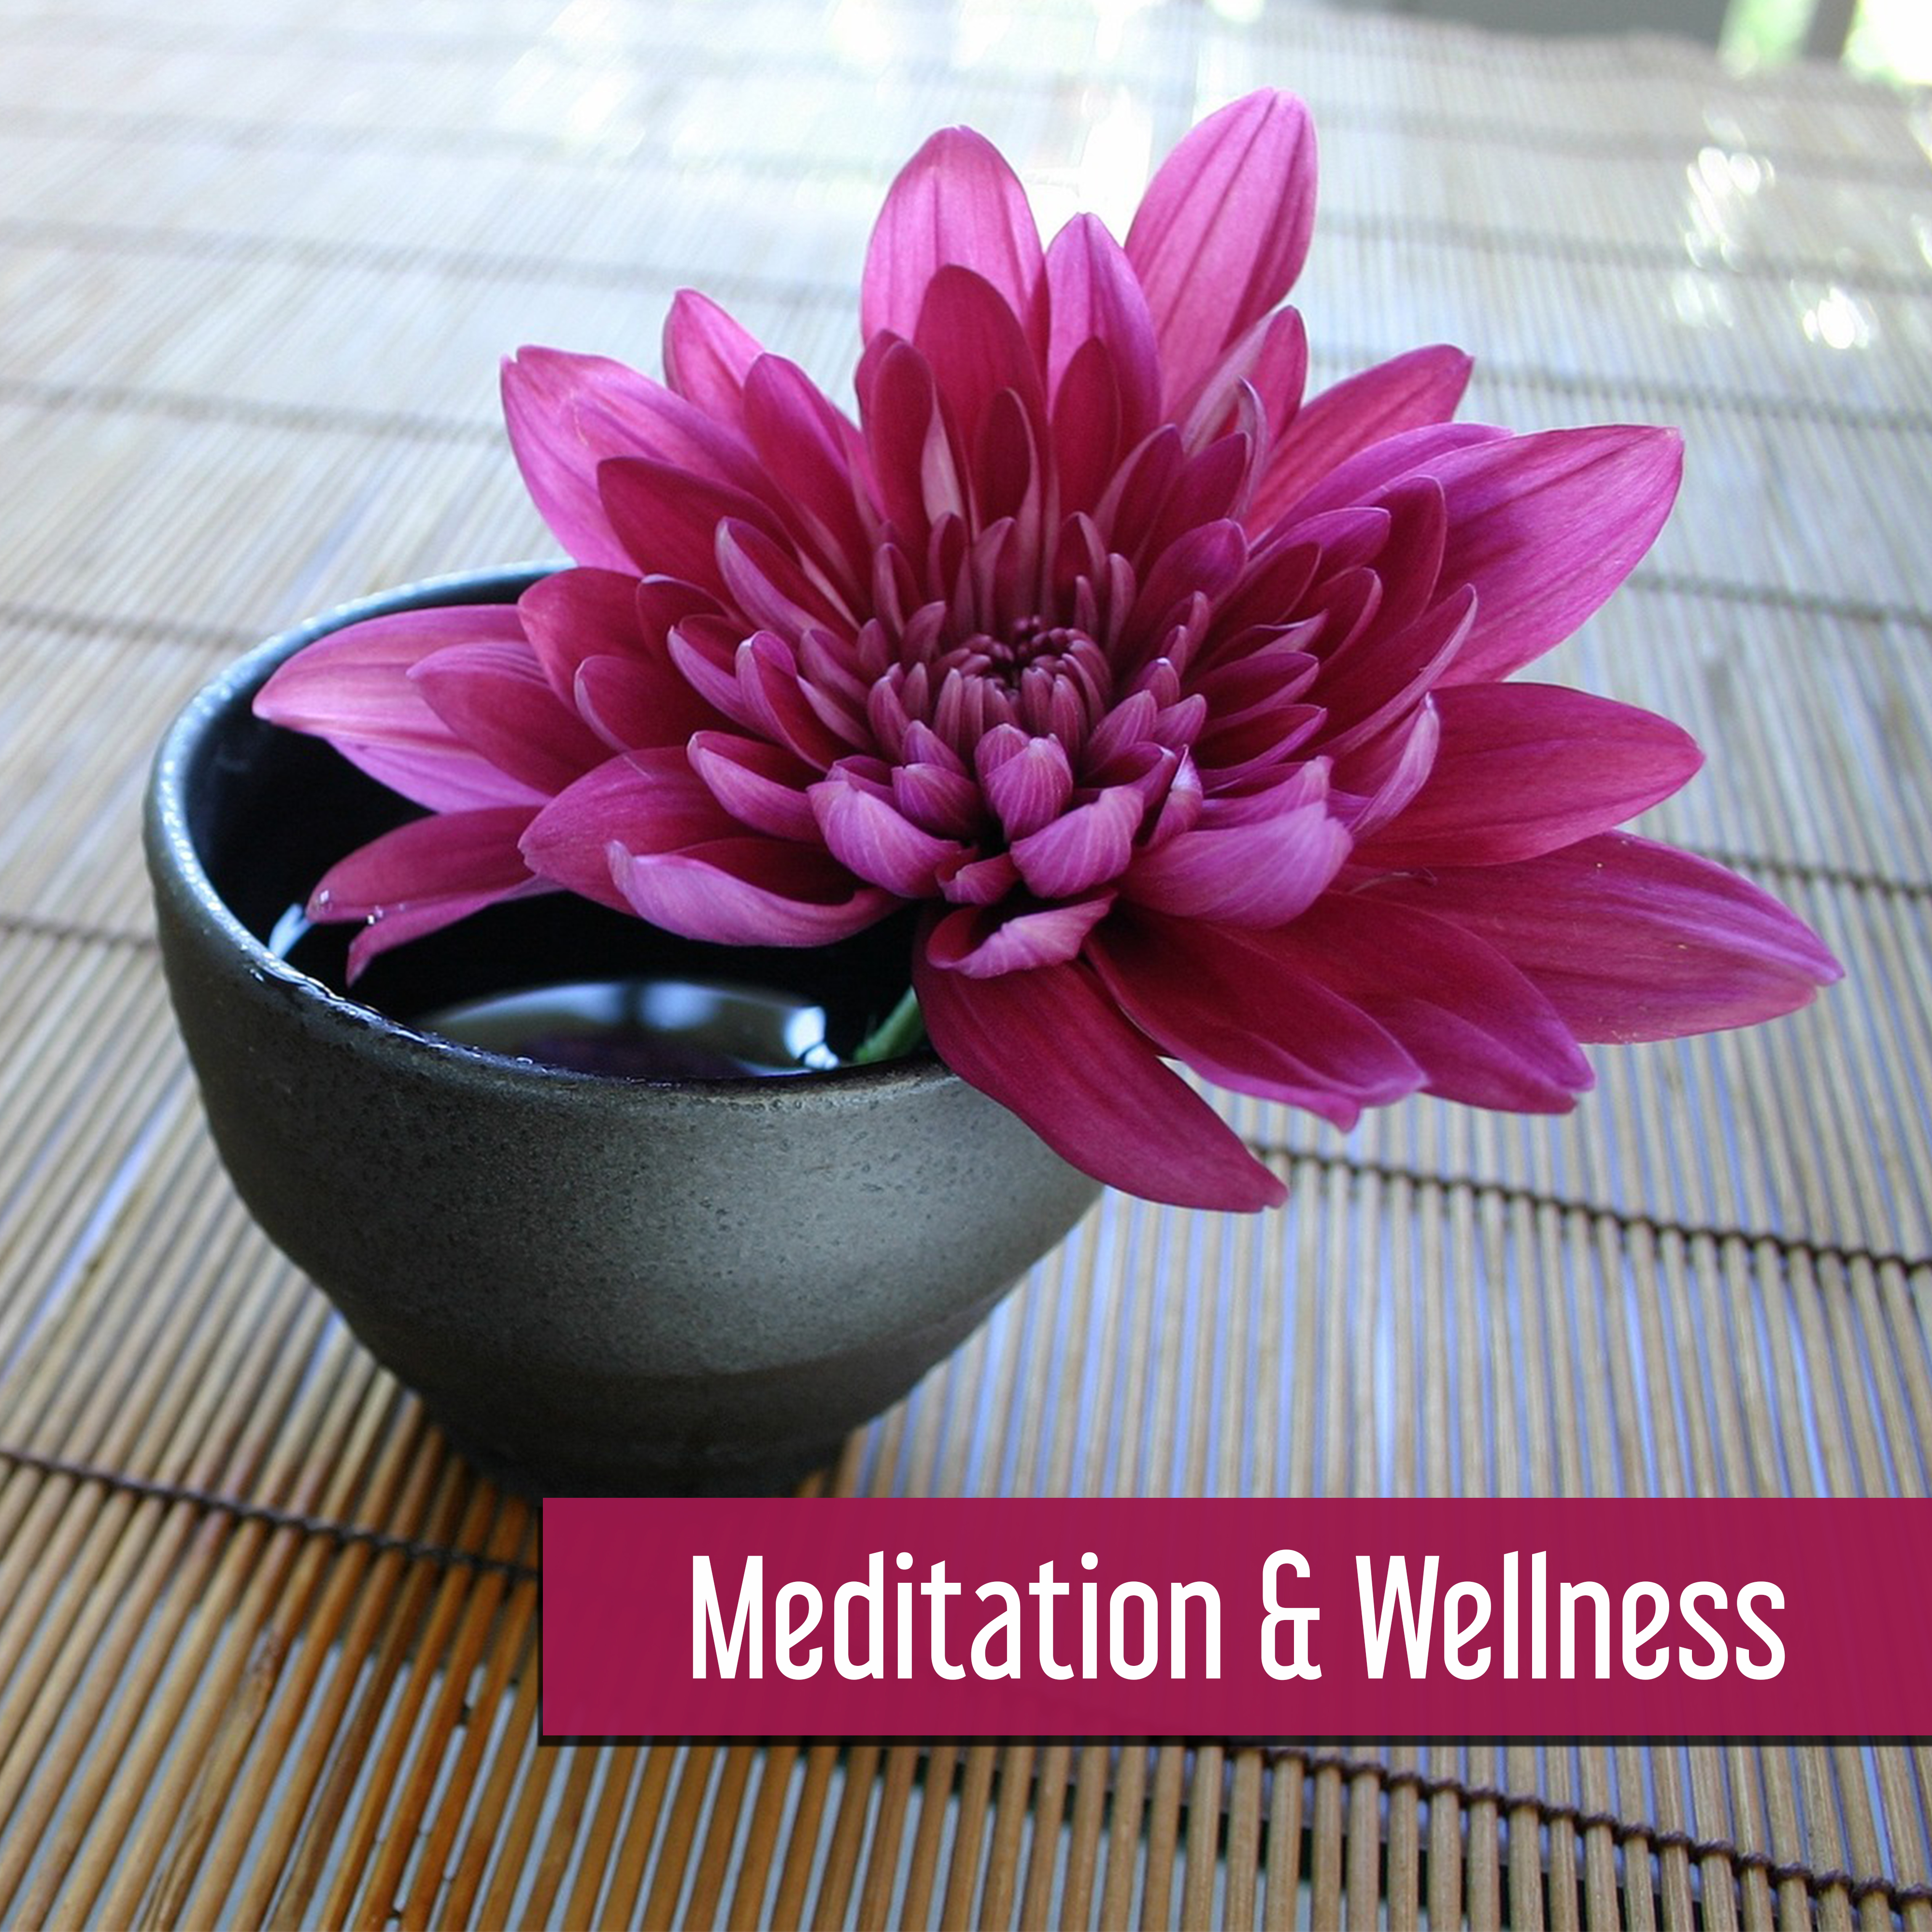 Meditation & Wellness – Spa Music, Pure Massage, Soothing Piano, Oriental Flute, Asian Zen Spa, Soft Music for Relaxation, Harmony